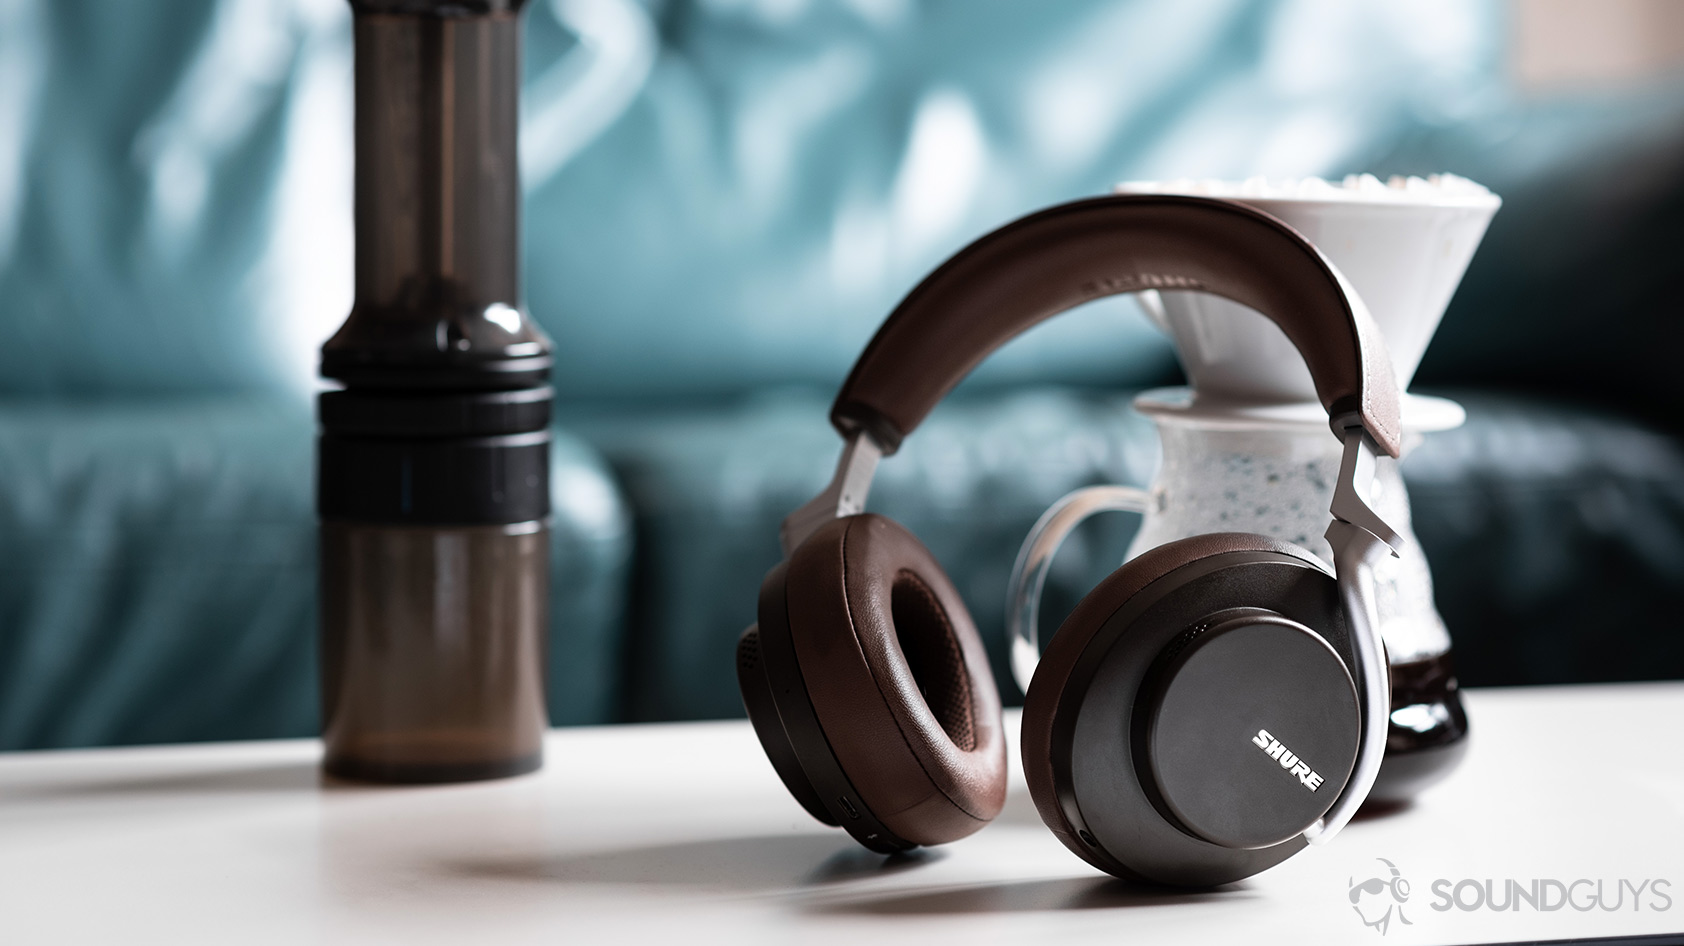 An picture of the Shure Aonic 50 noise canceling headphones in brown leaning against a coffee carafe.